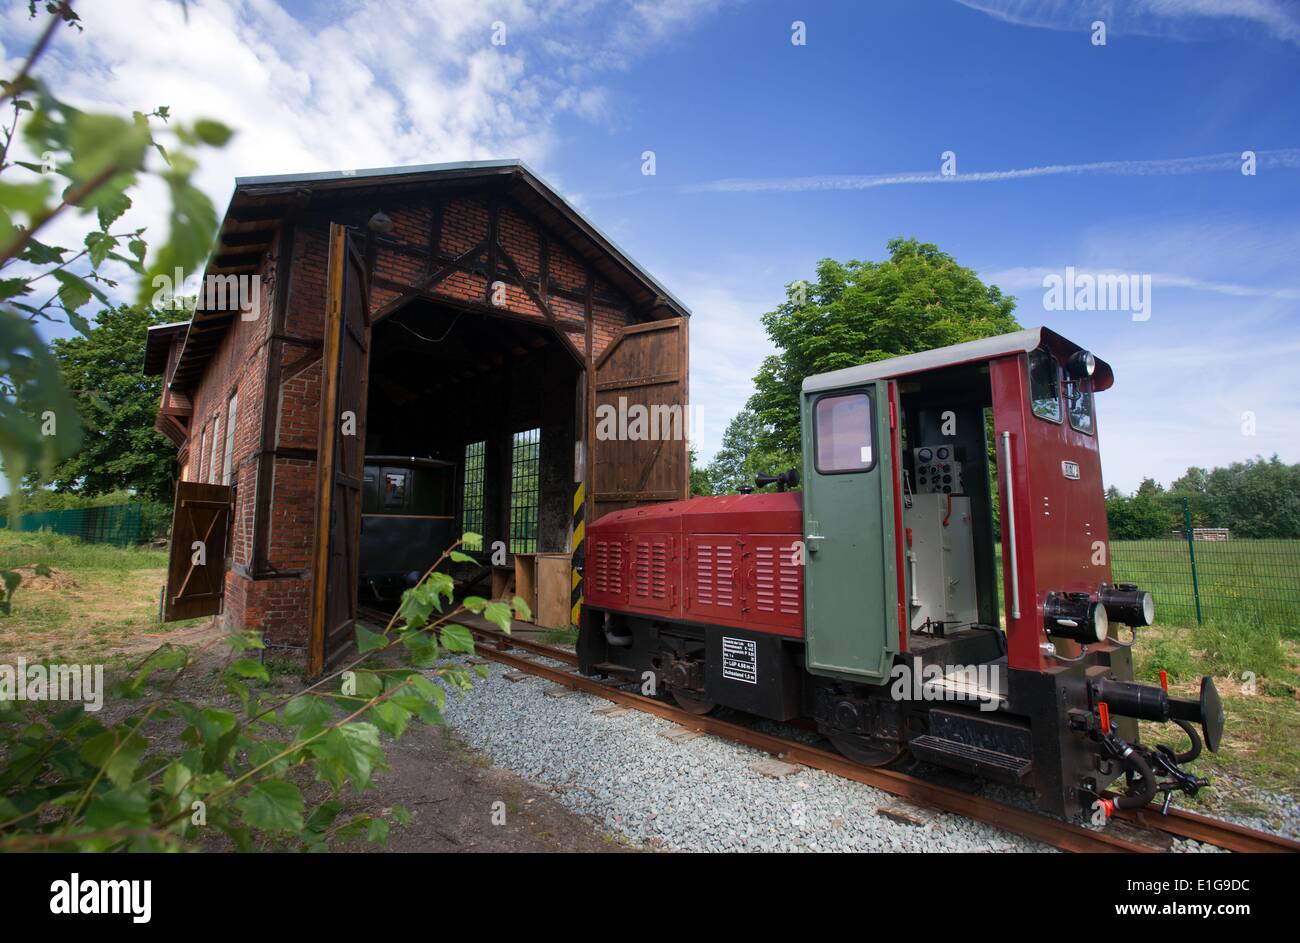 The narrow gage diesel locomotive DIEMA DFL 75 at an historic depot on the new railway route of the historic 'Kaffeebrenner' (coffee burner) in Kluetz, Germany, 03 June 2014. The route was closed ten years ago but will open again as a narrow gage line on 21 June with an investment of around 2 million euros into the line which originally opened in 1905. The name Kaffeebrenner comes from the use of the line to transport grain and oats for malt coffee production. The operator of the six kilometer long touristic route is the German Narrow Gage Railway Foundation. Photo: JENS BUETTNER/dpa Stock Photo